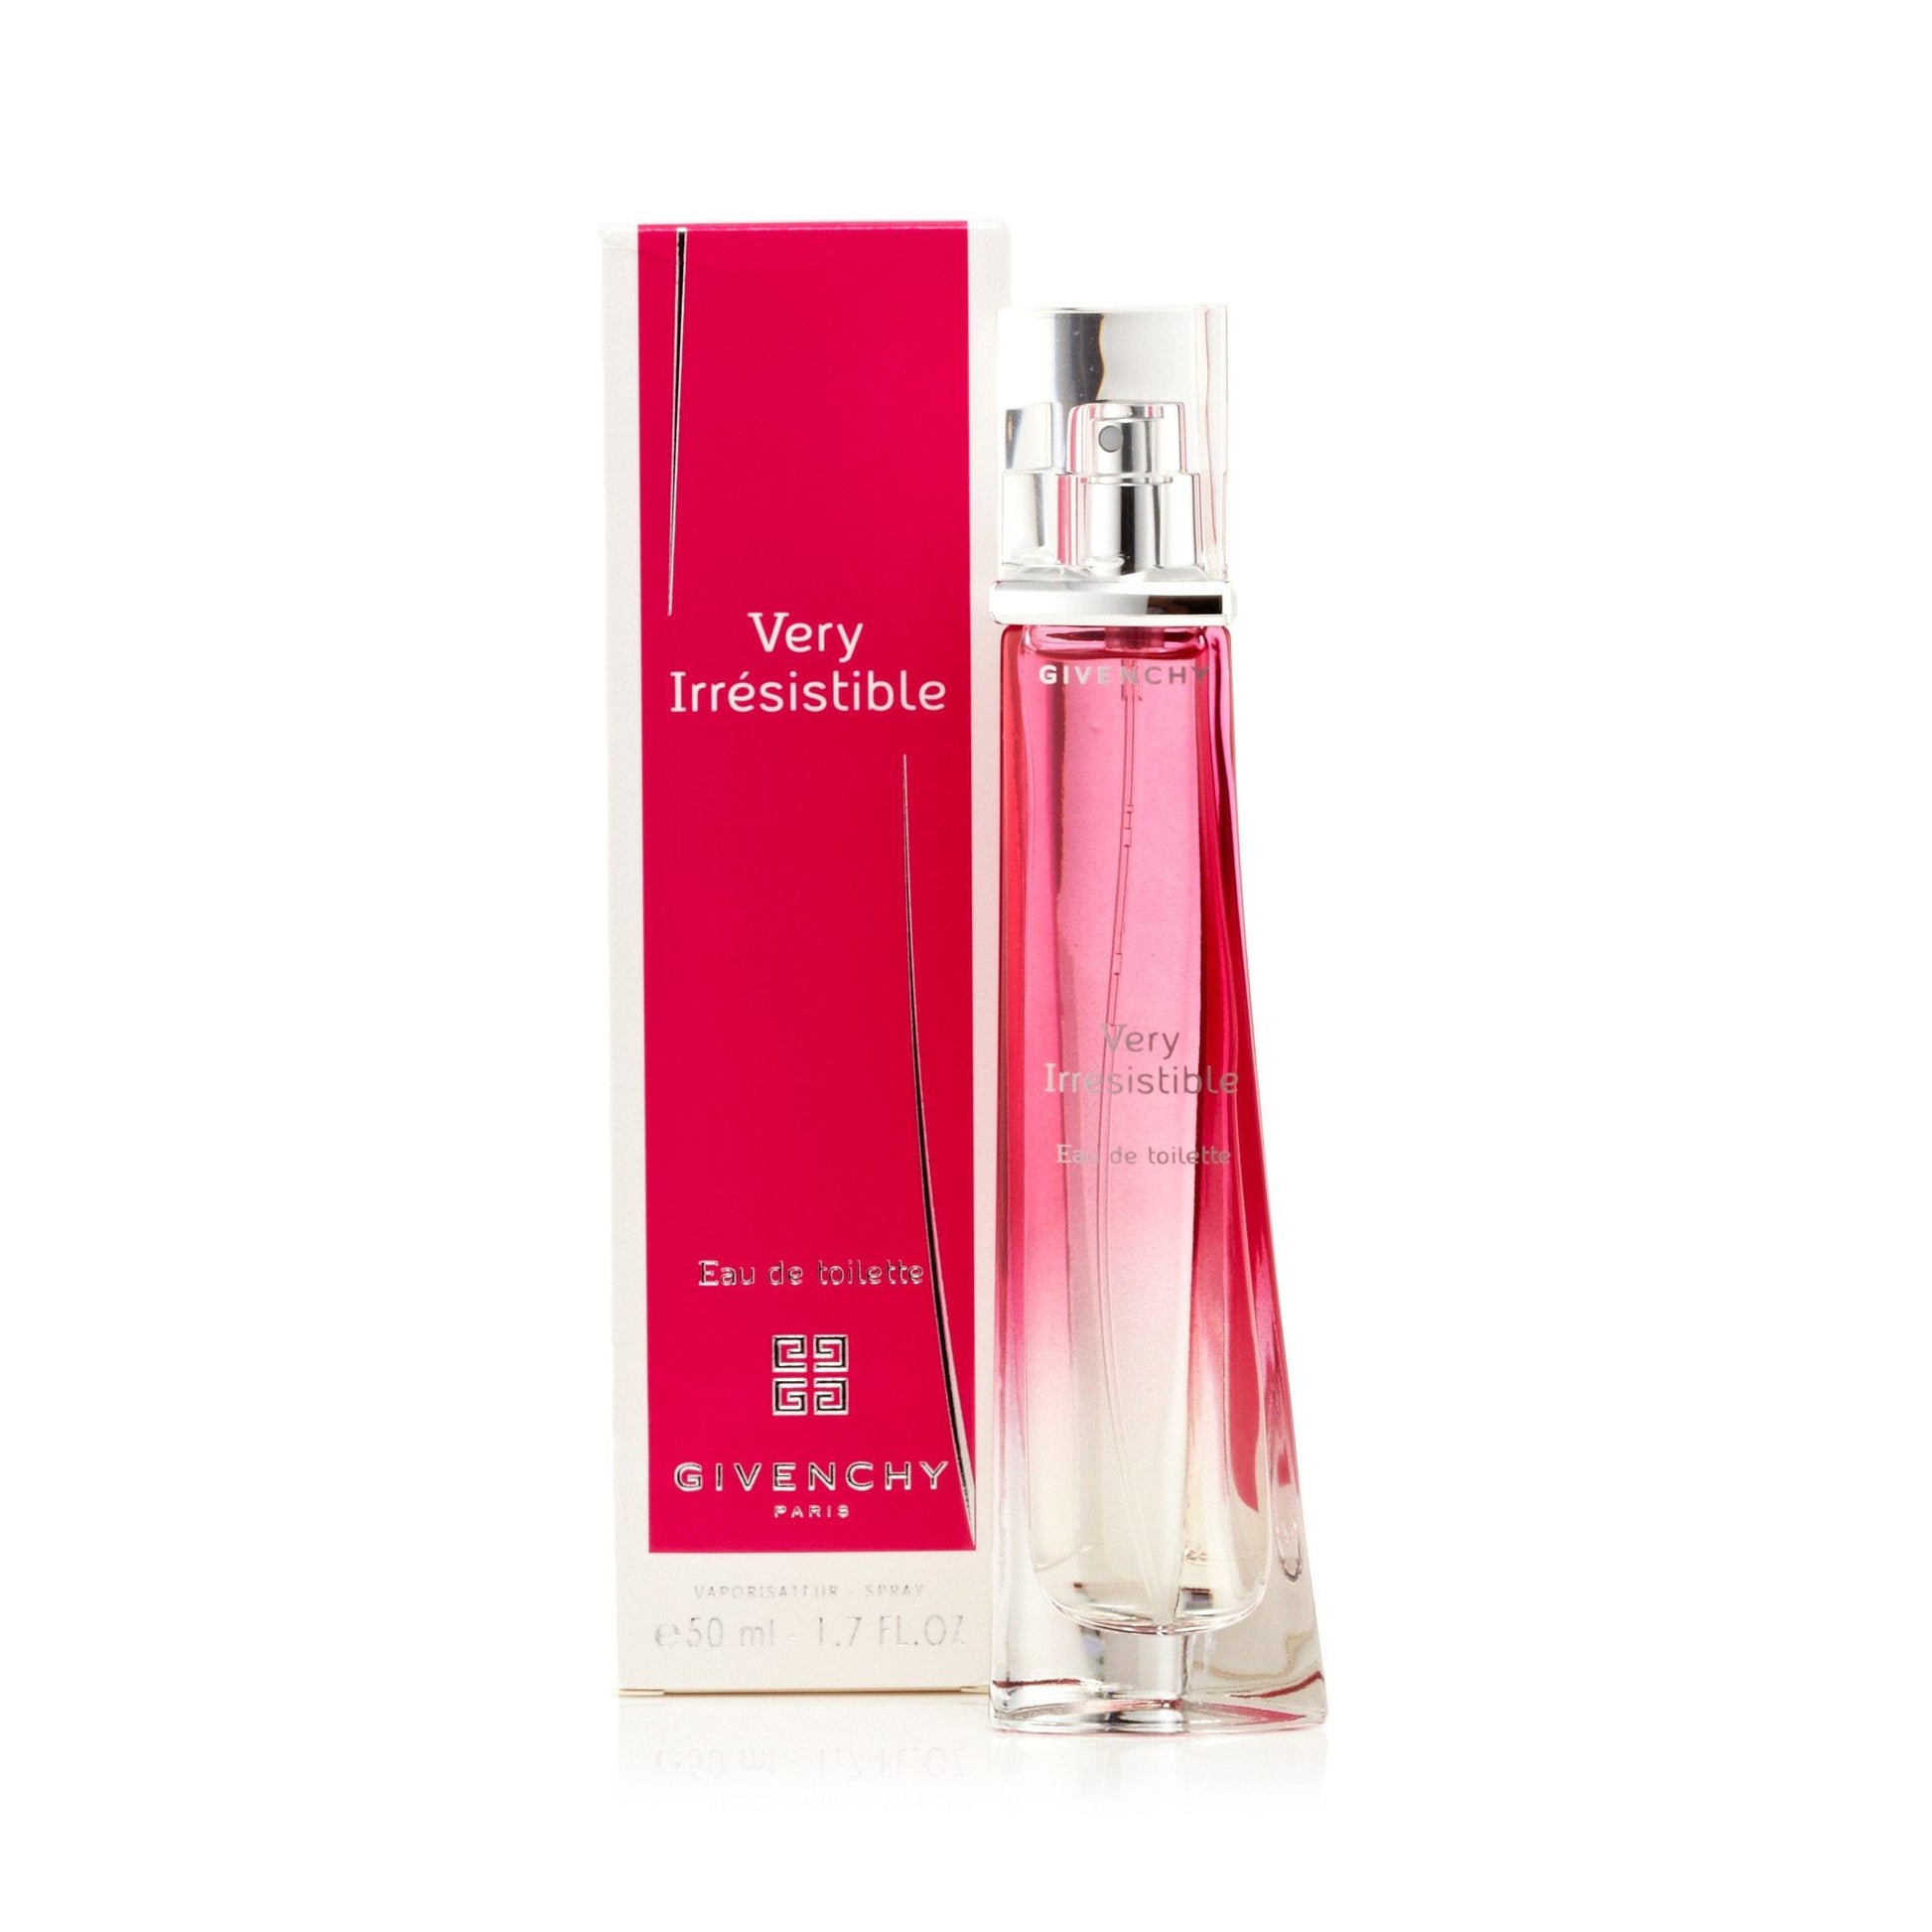 Very Irresistible Eau de Toilette Spray for Women by Givenchy, Product image 3